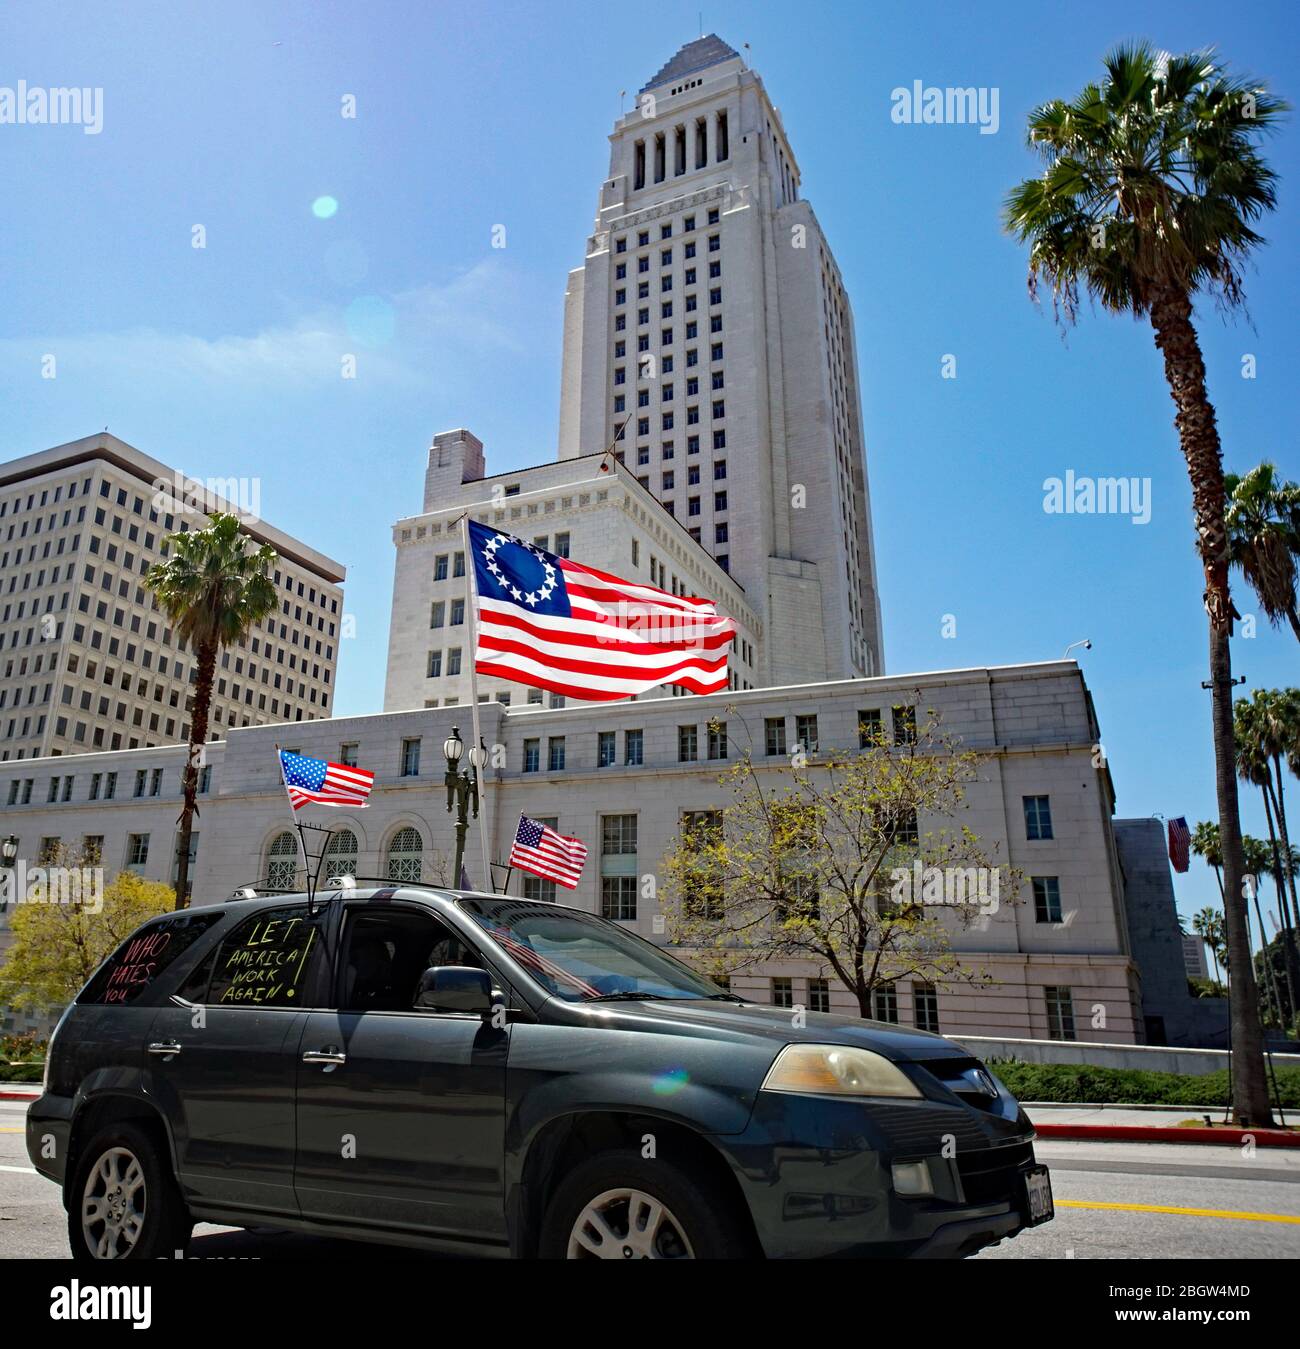 22nd April 2020 Los Angeles California, Protesters in Front of City Hall demanding Governor Newsom to open LA, End the Quarantine. Stock Photo